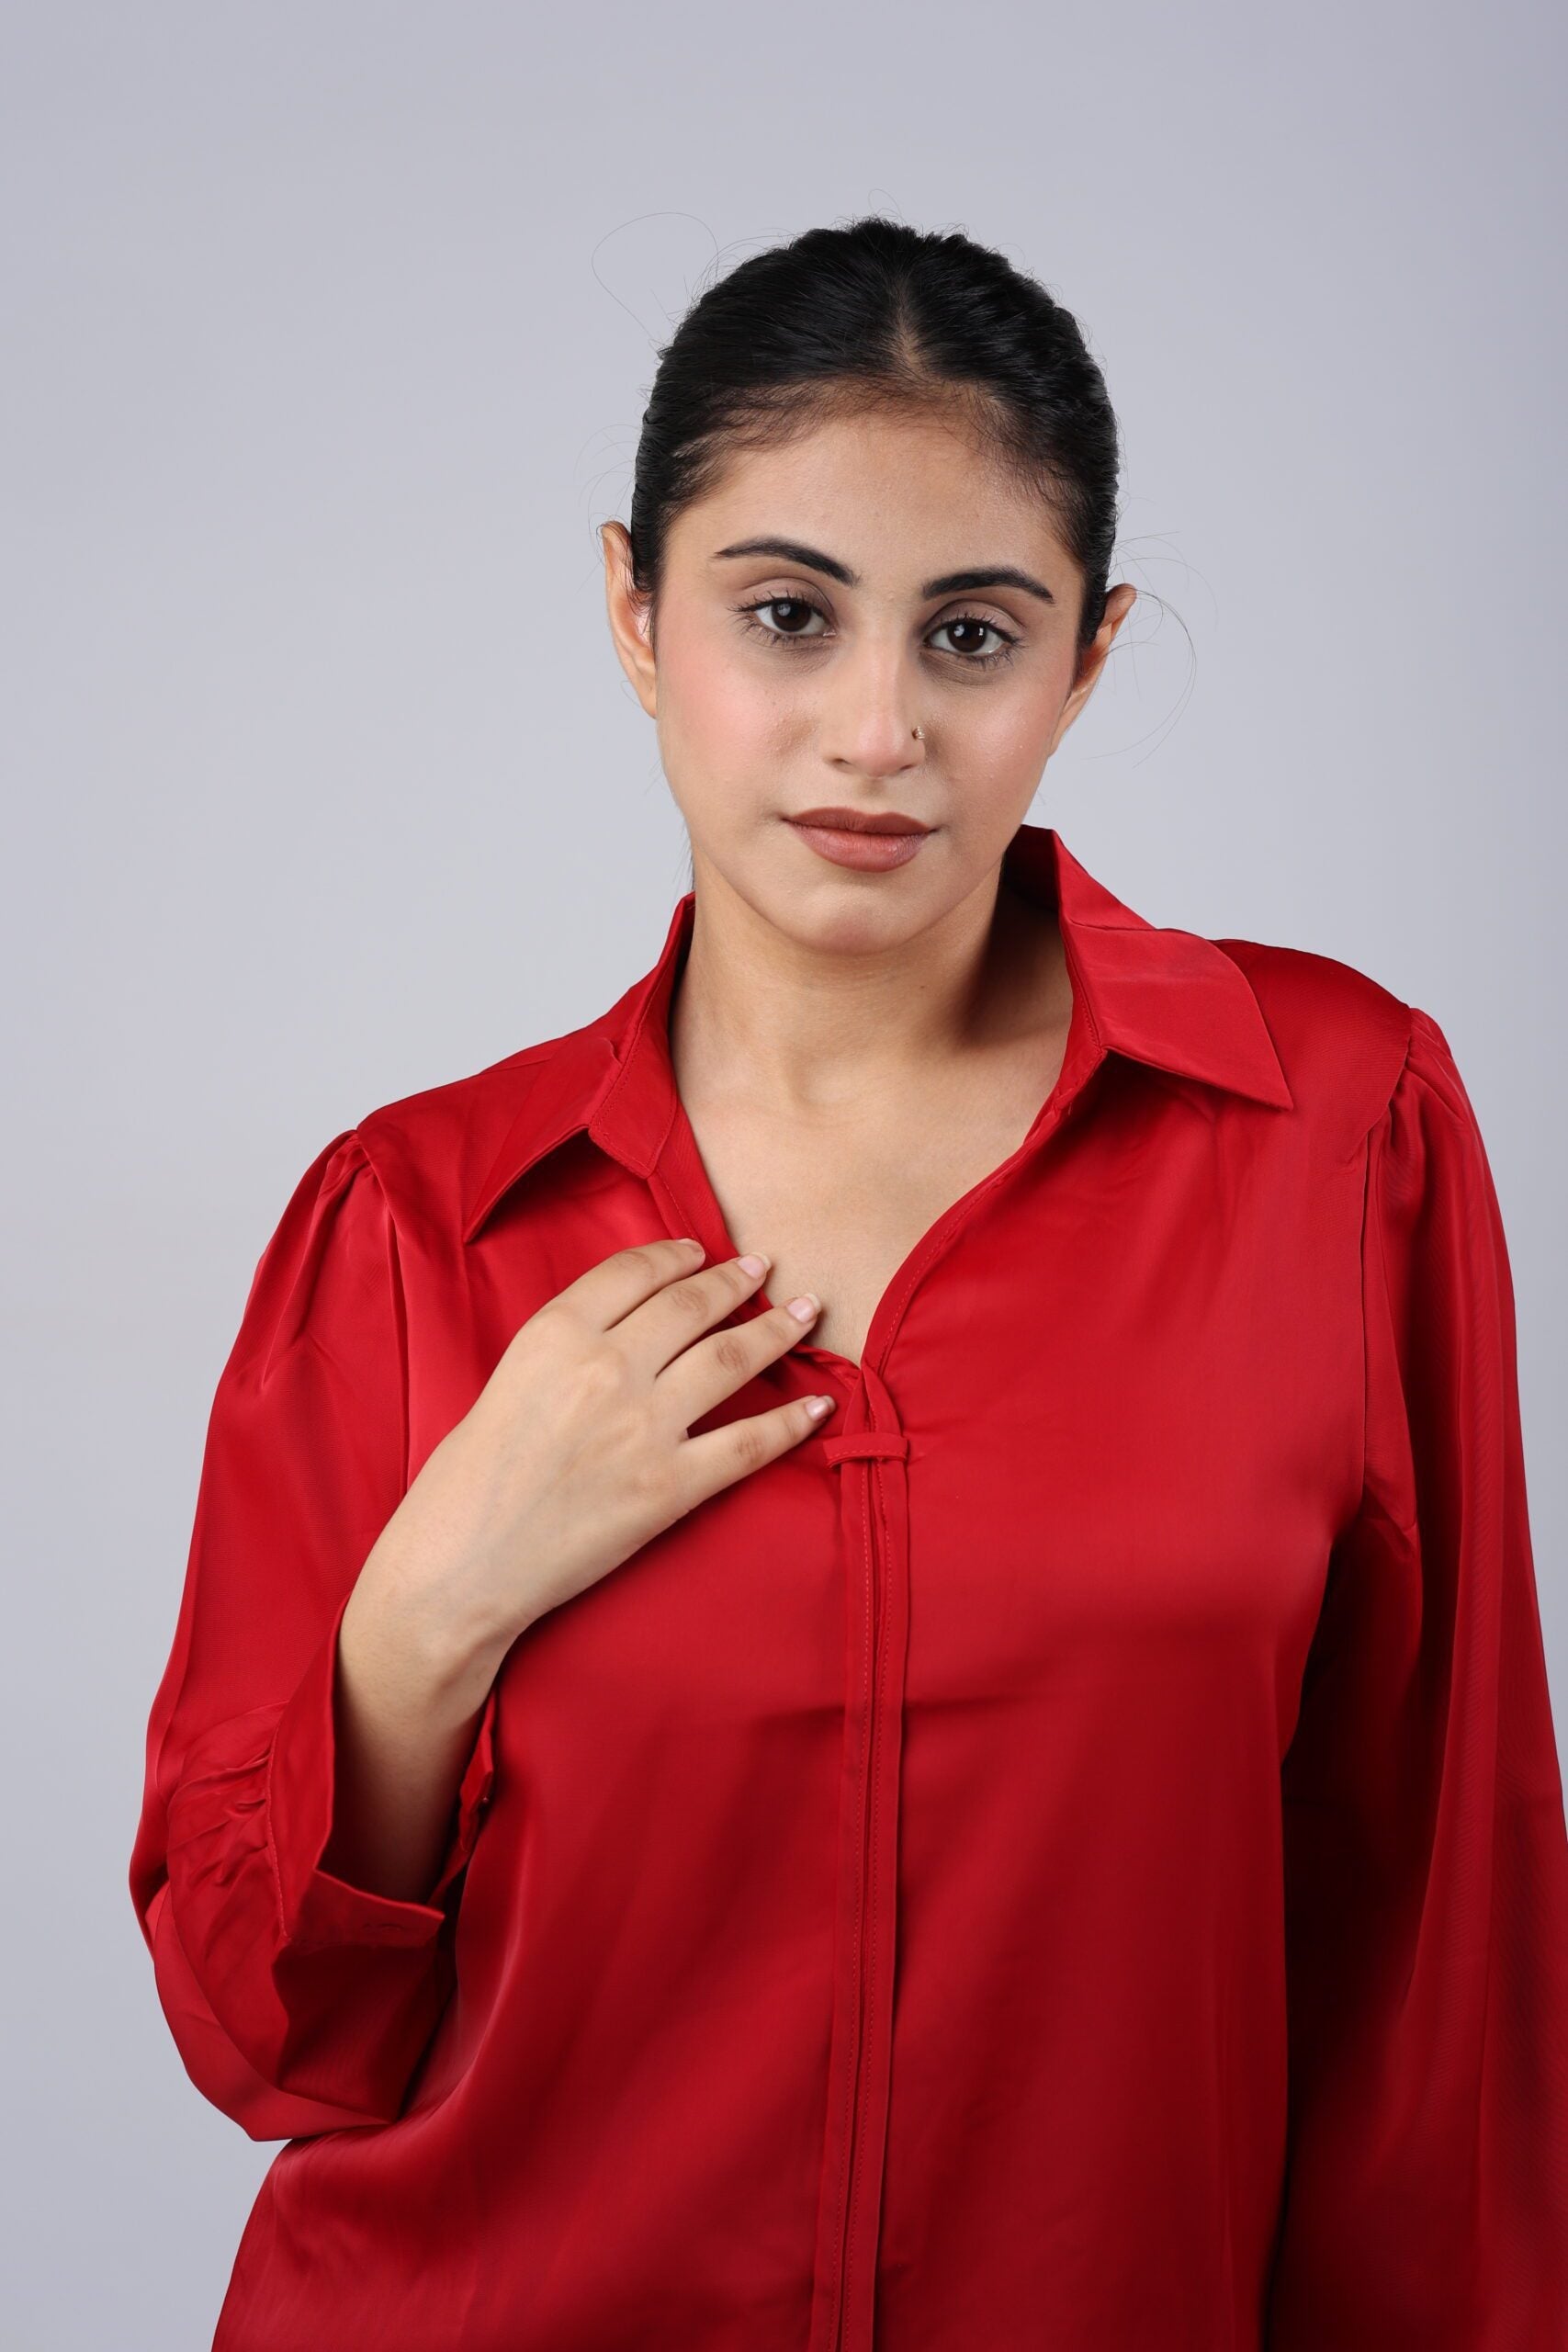 Red Satin Formal/Casual Top - A Luxurious Choice for Effortless Elegance!